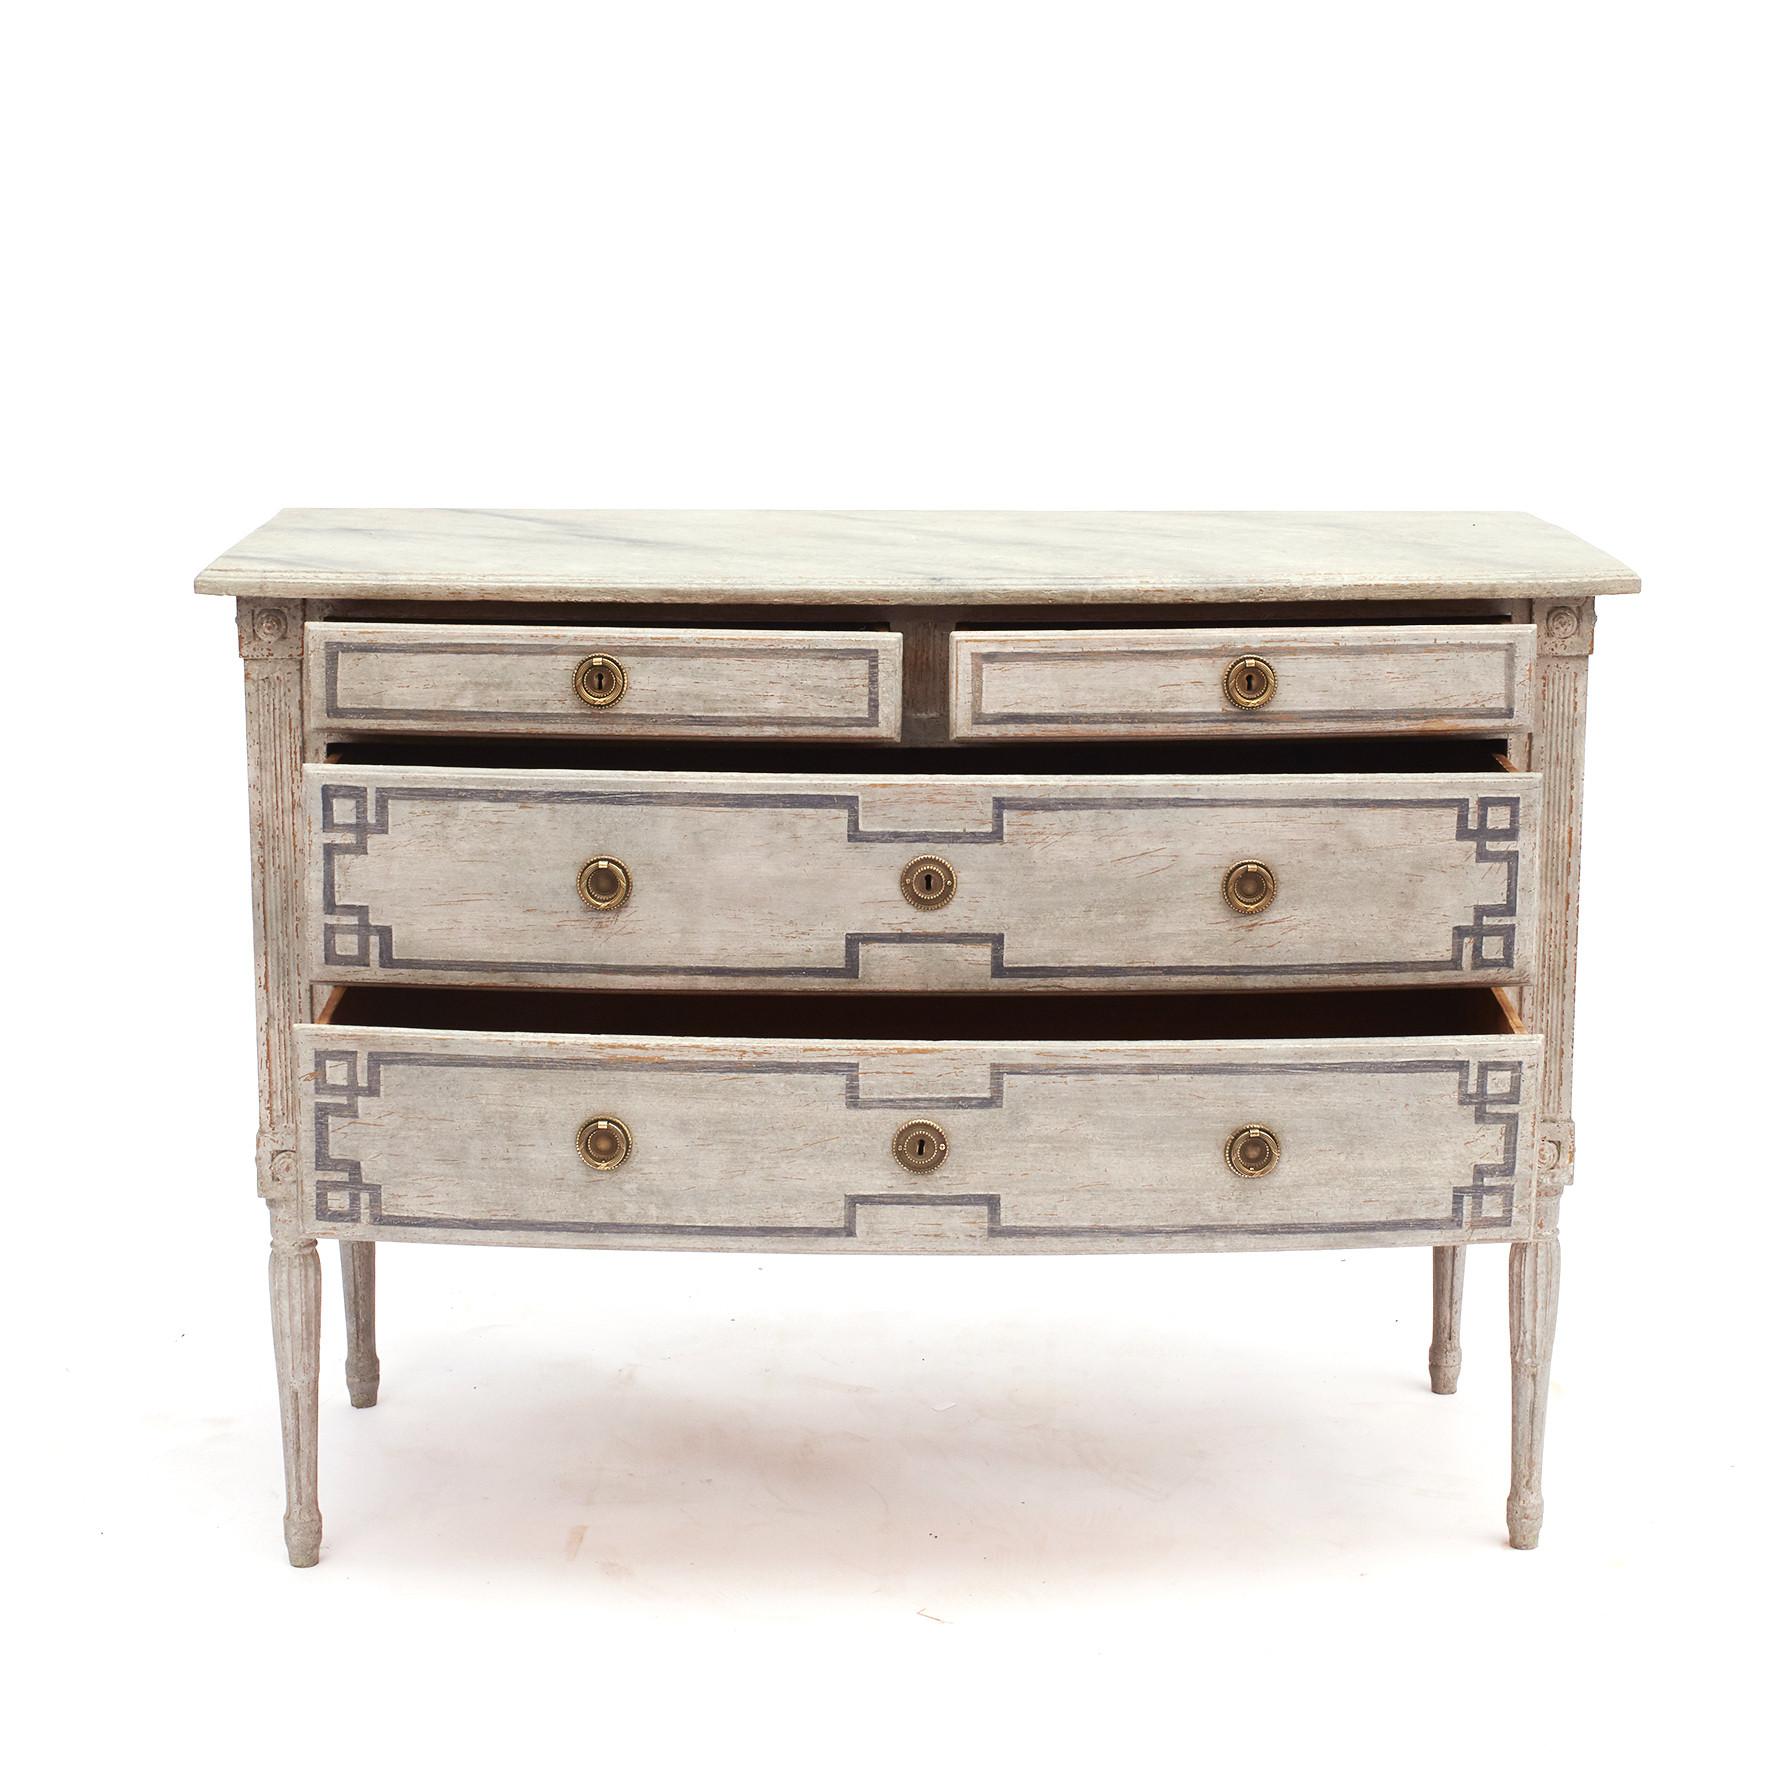 Painted Swedish Gustavian Style Chest of Drawers